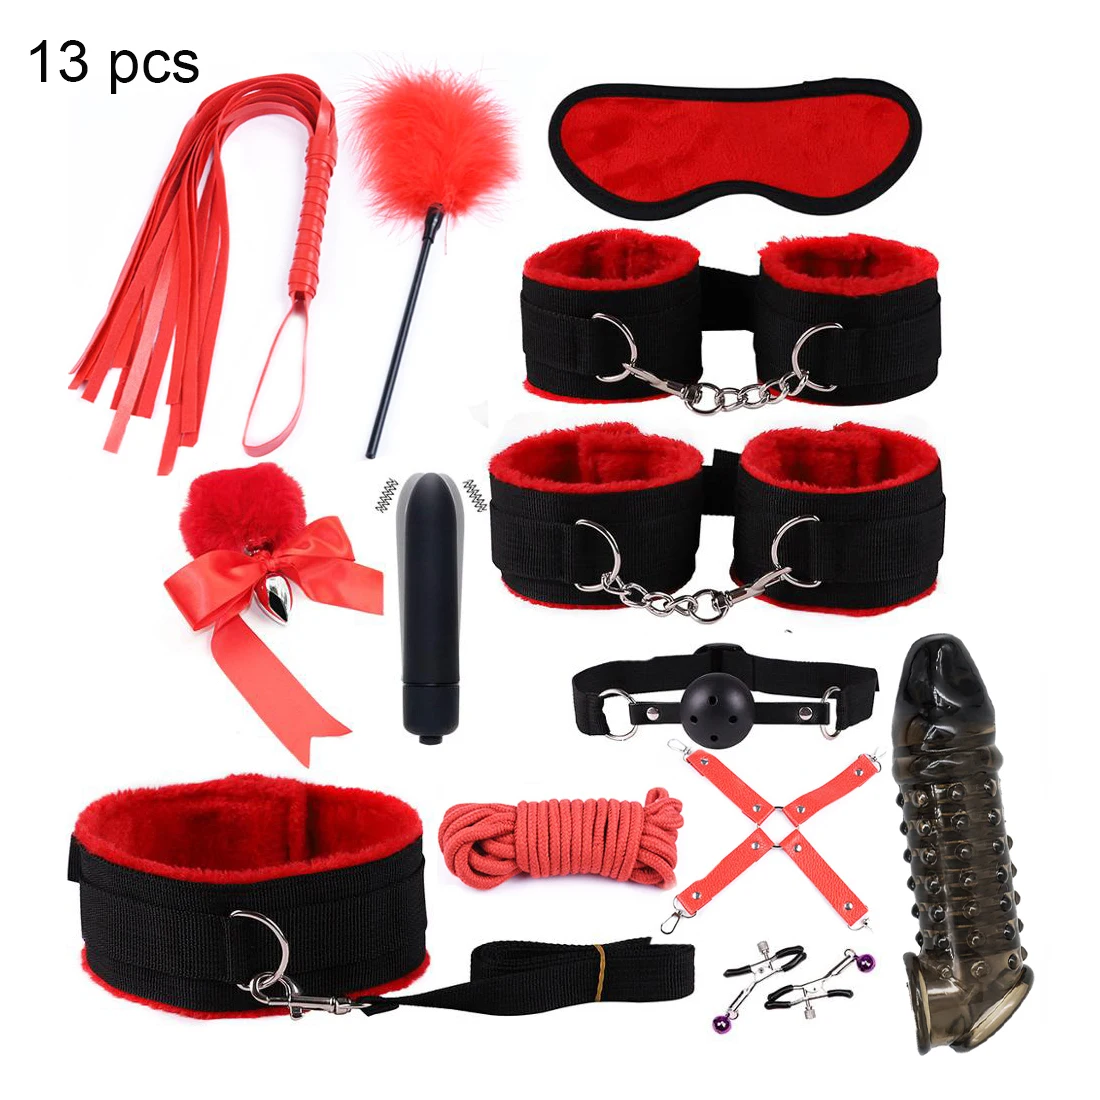 House Home Ay Leather A Kits Plush A A Set HandA A Games Whip Gag A Clamps s For - £32.26 GBP